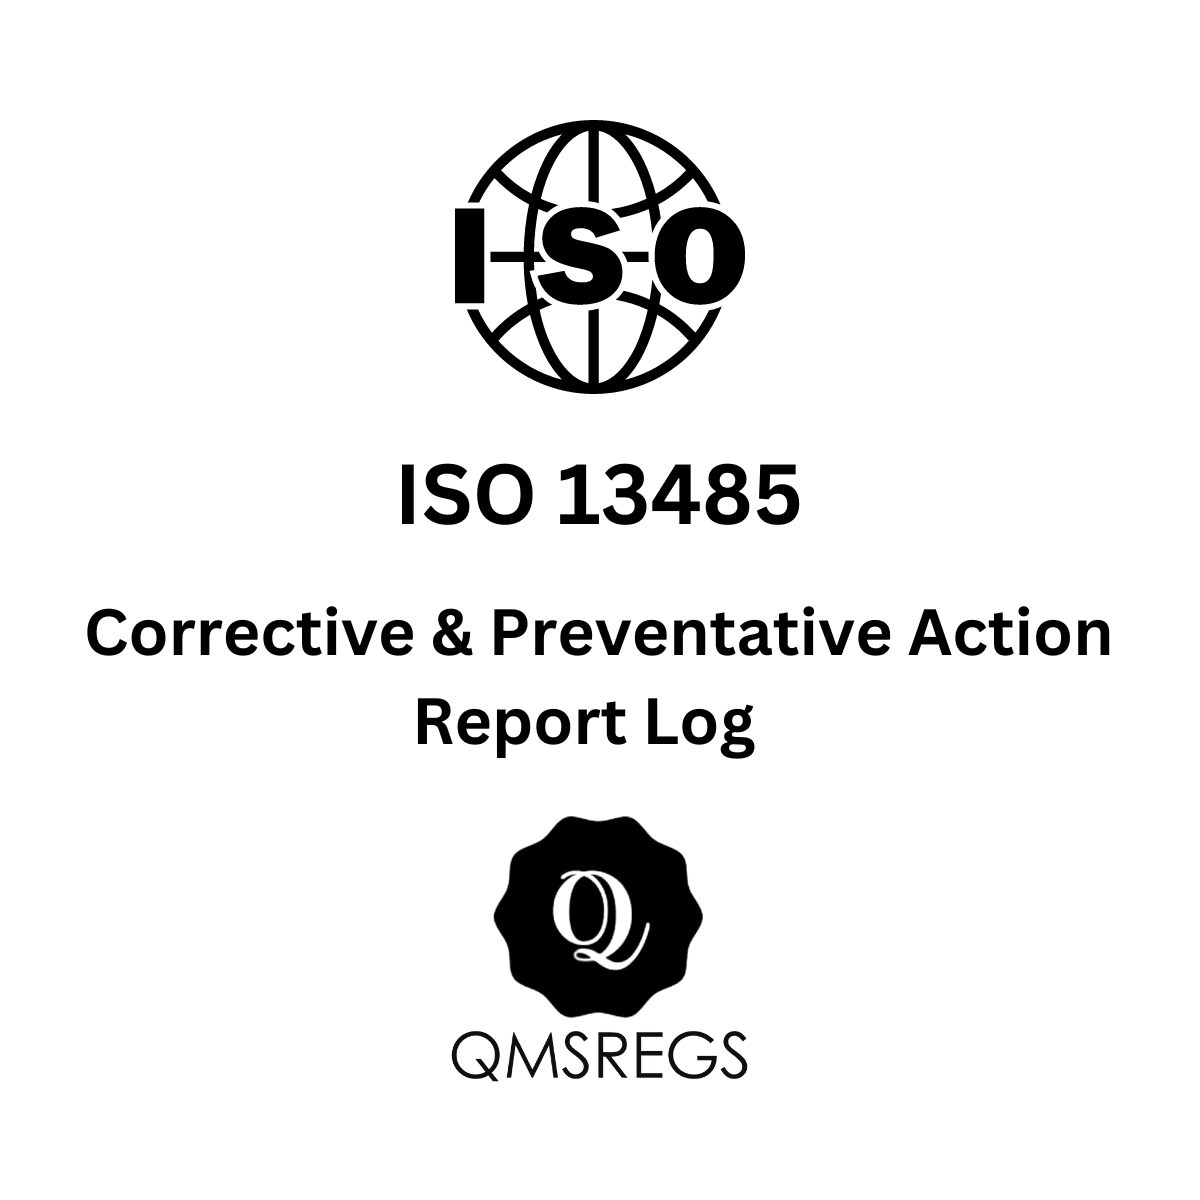 ISO 13485 corrective and preventative action (CAPA) report log template